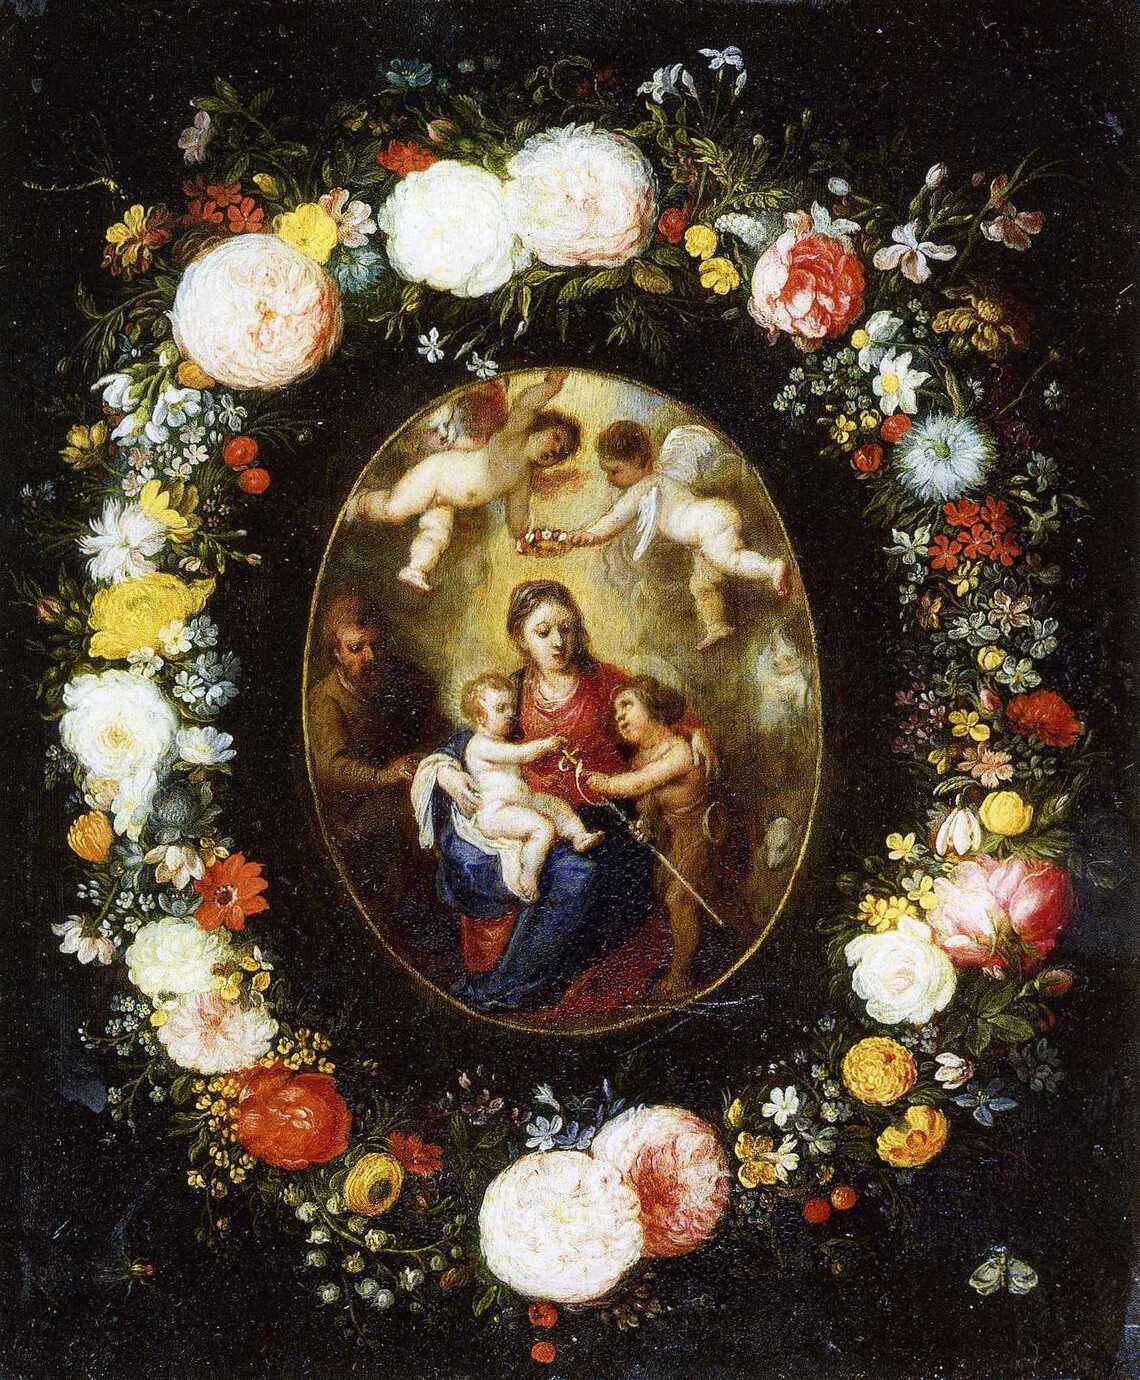 Flower Garland Around the Holy Family and John the Baptist (Zurich)